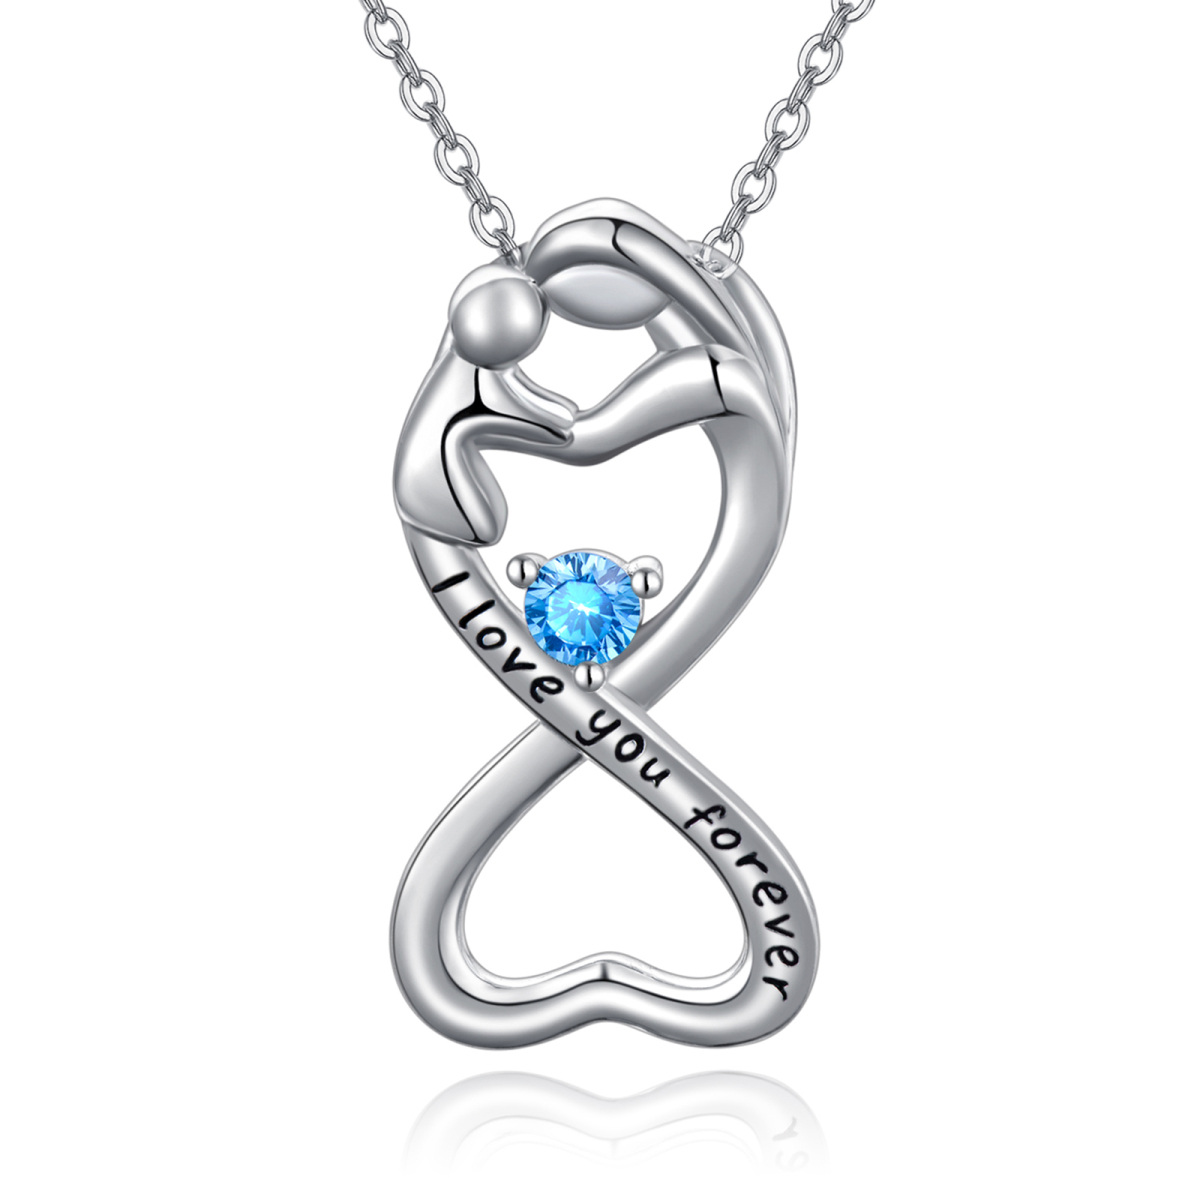 Sterling Silver Cubic Zirconia Infinite Symbol Pendant Necklace with Engraved Word-1